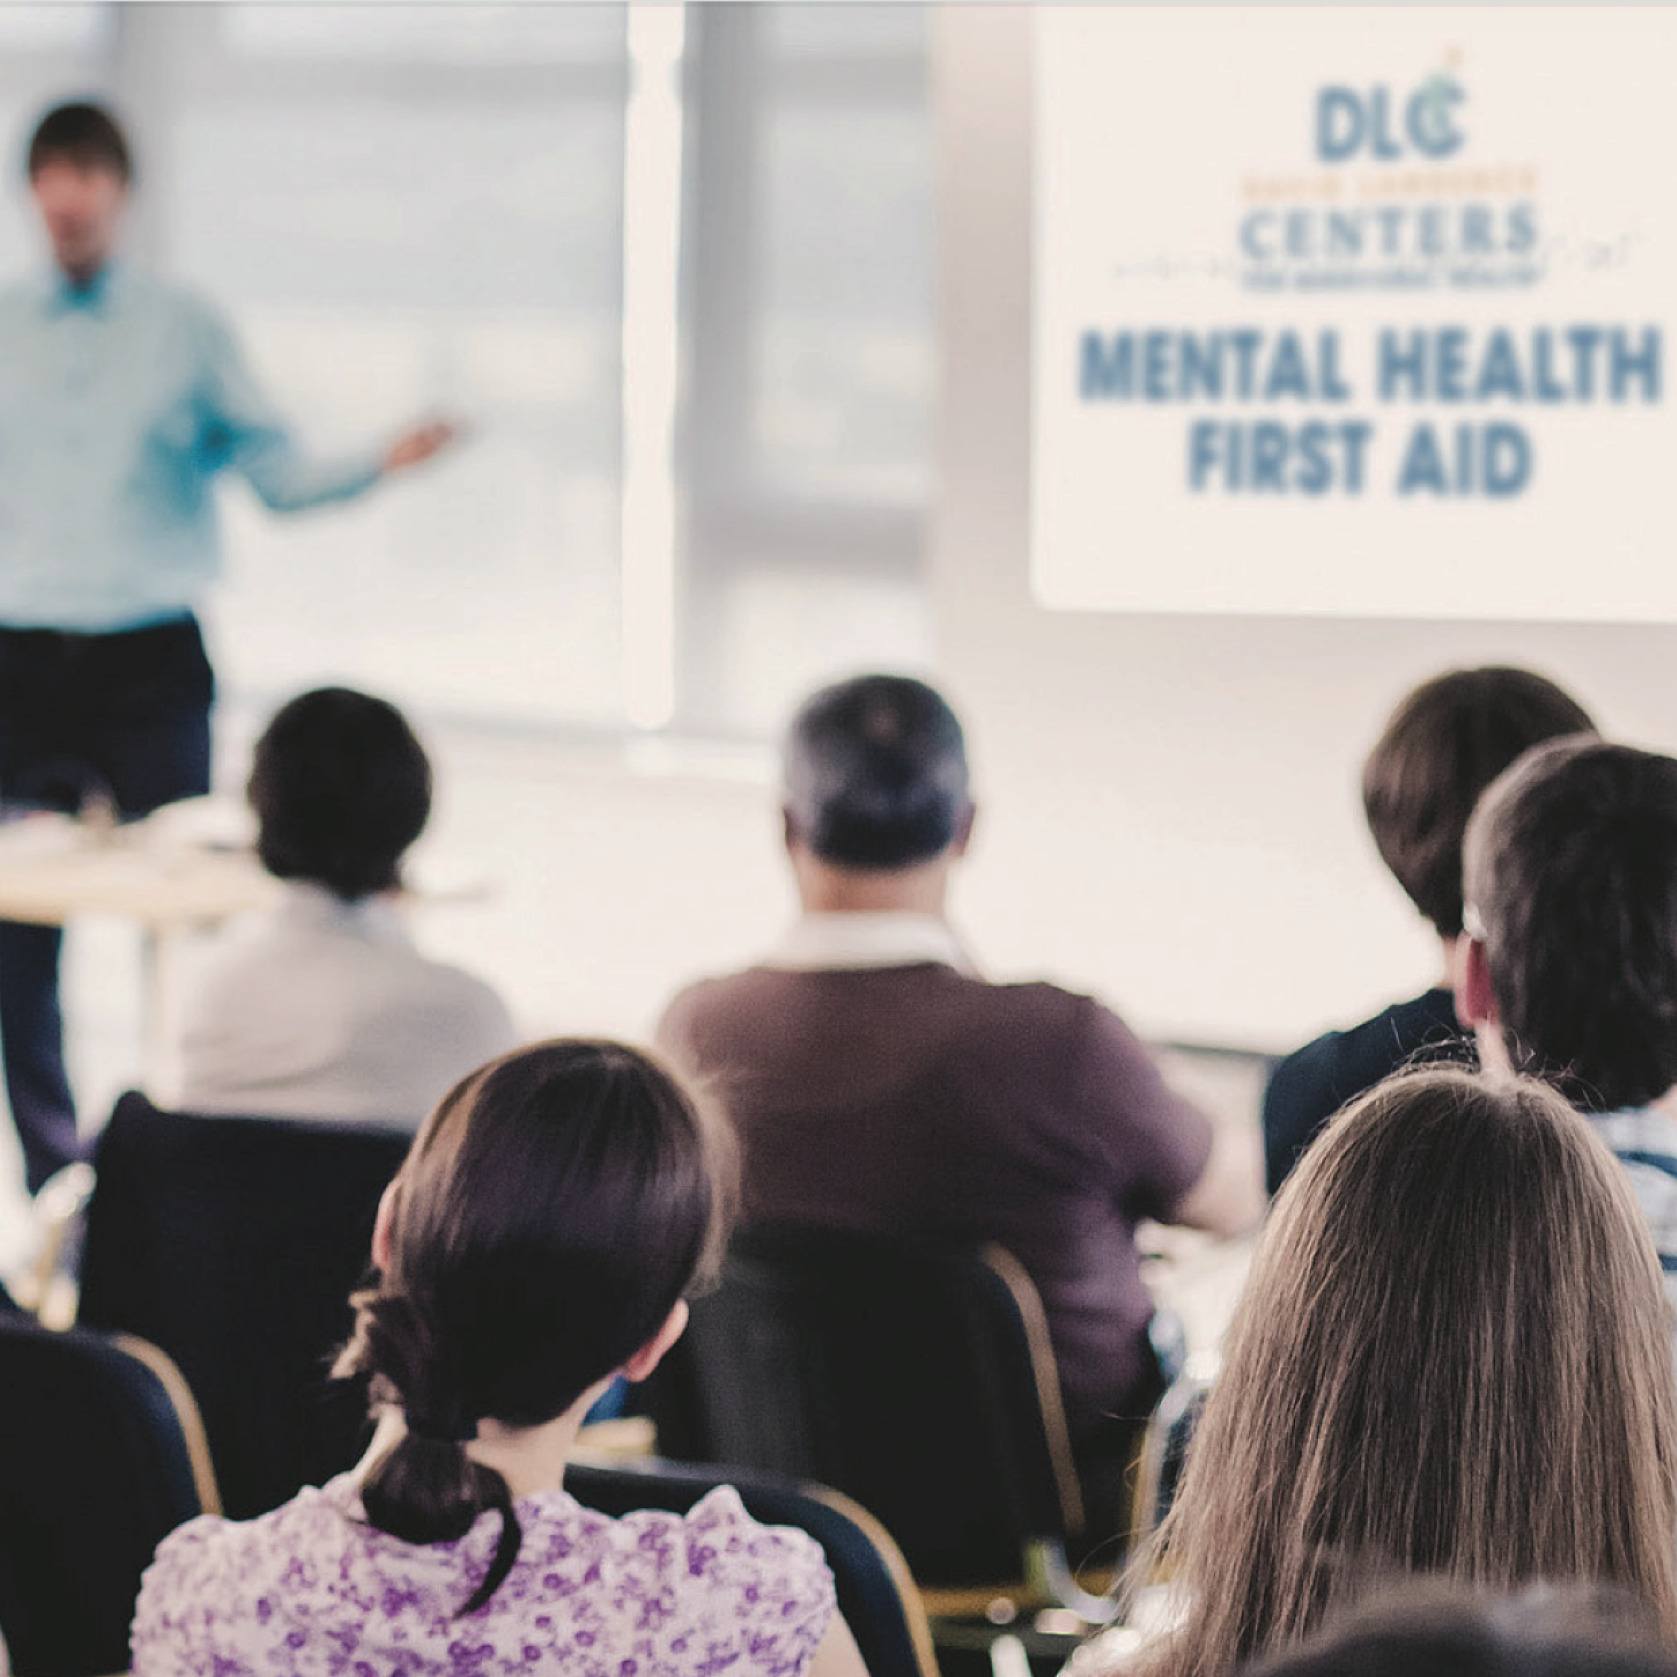 July 26th Adult Mental Health First Aid Training (In-Person Instructor-Led Session)